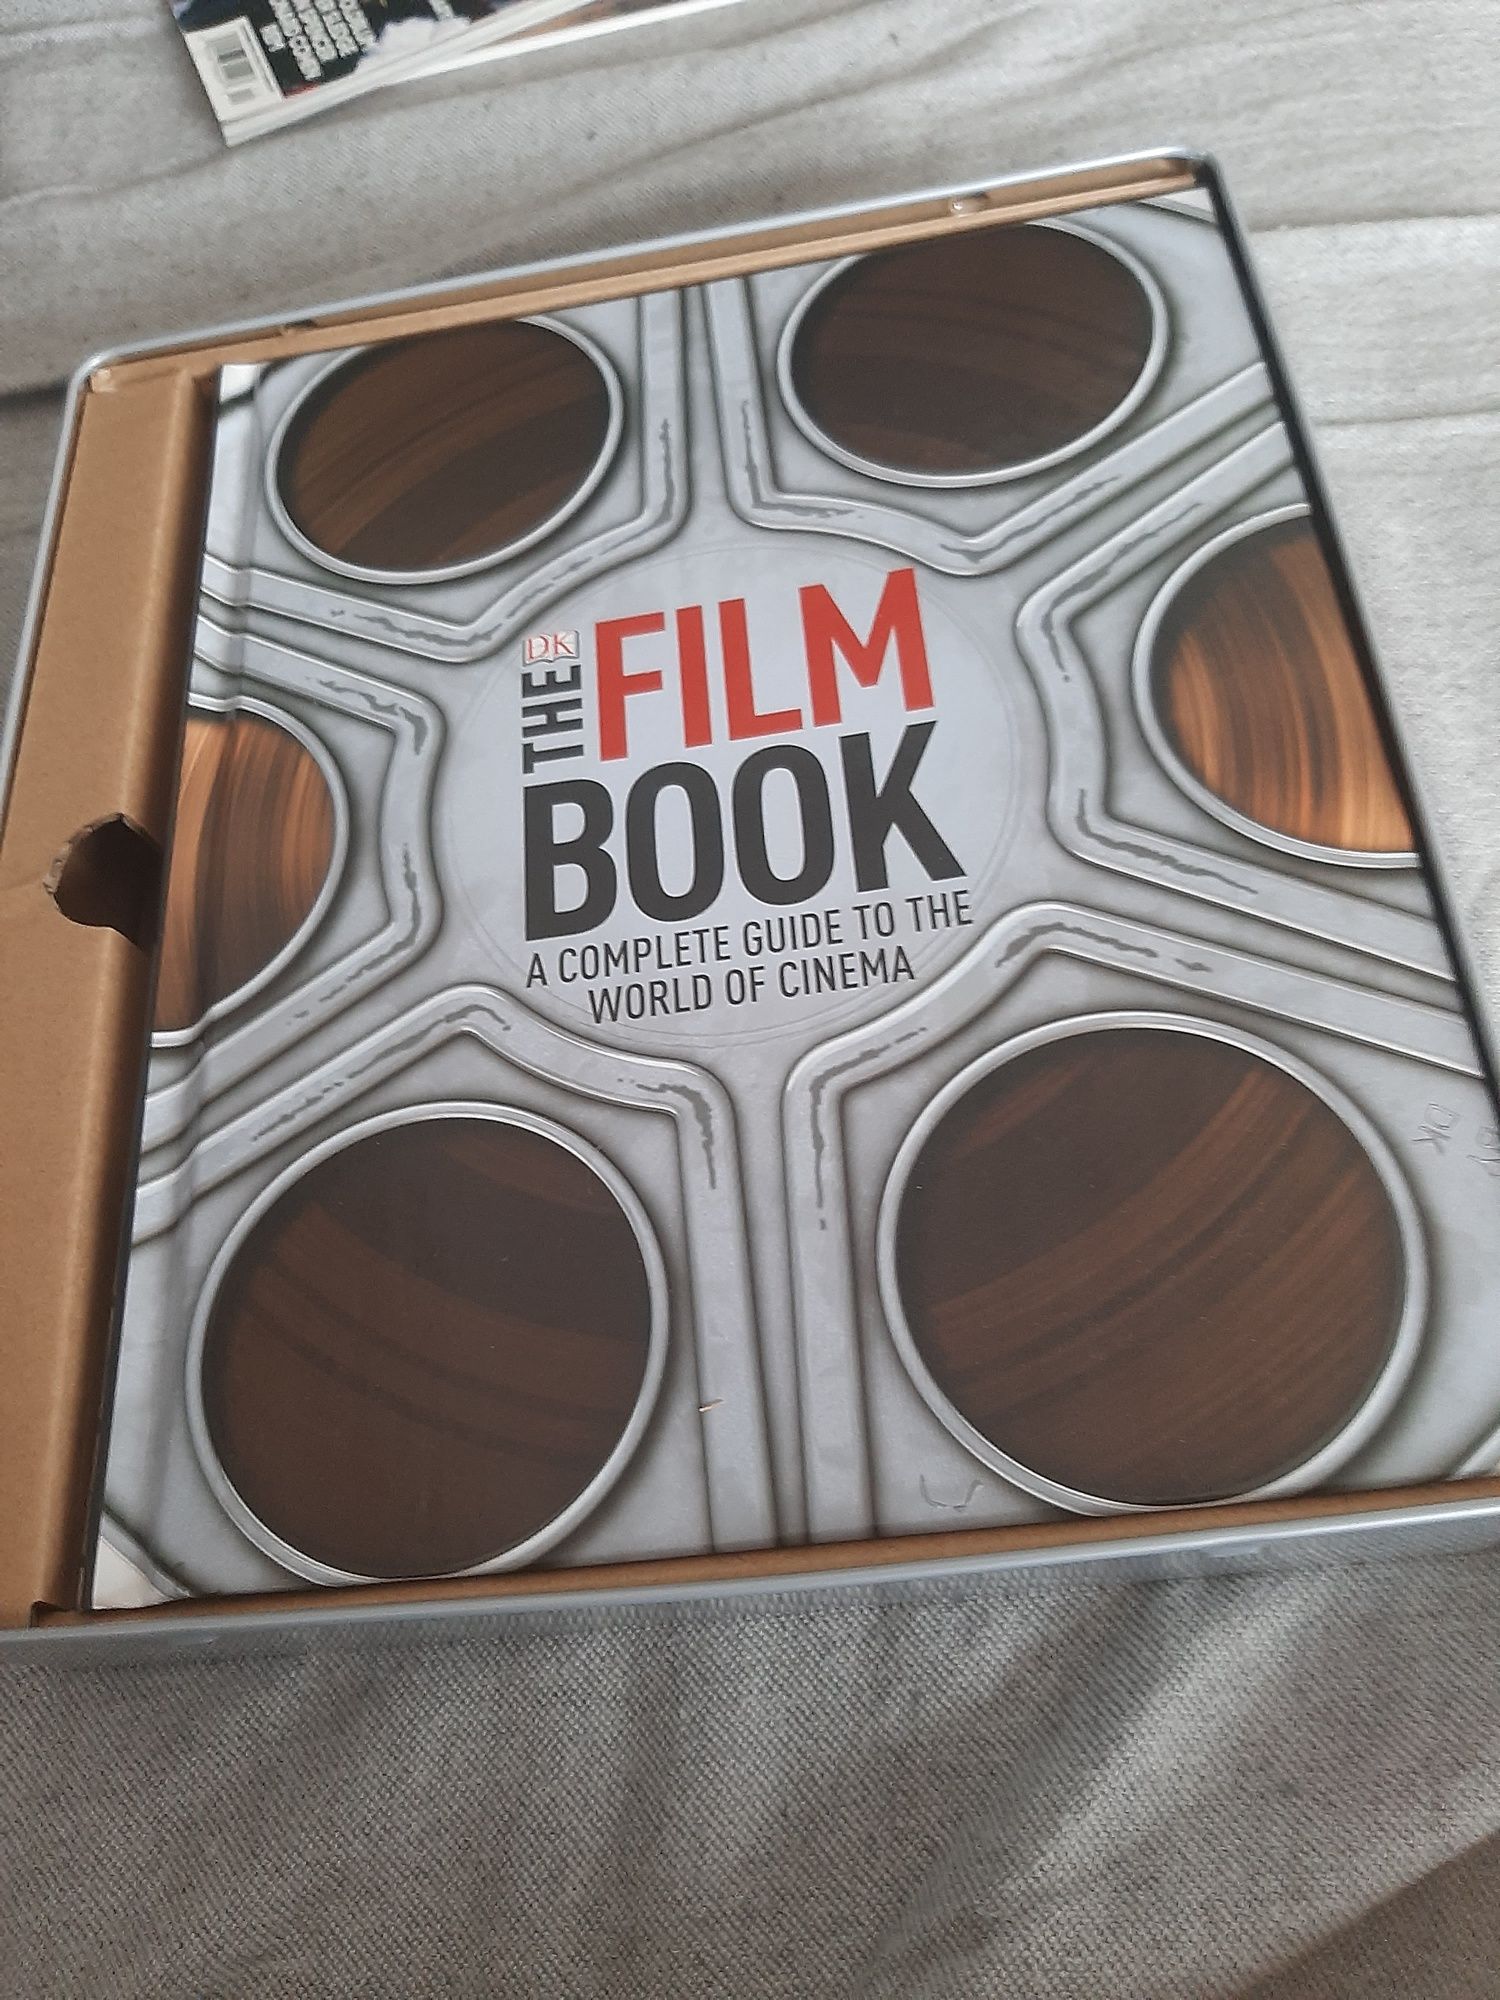 The film book - a complete guide to the world of cinema